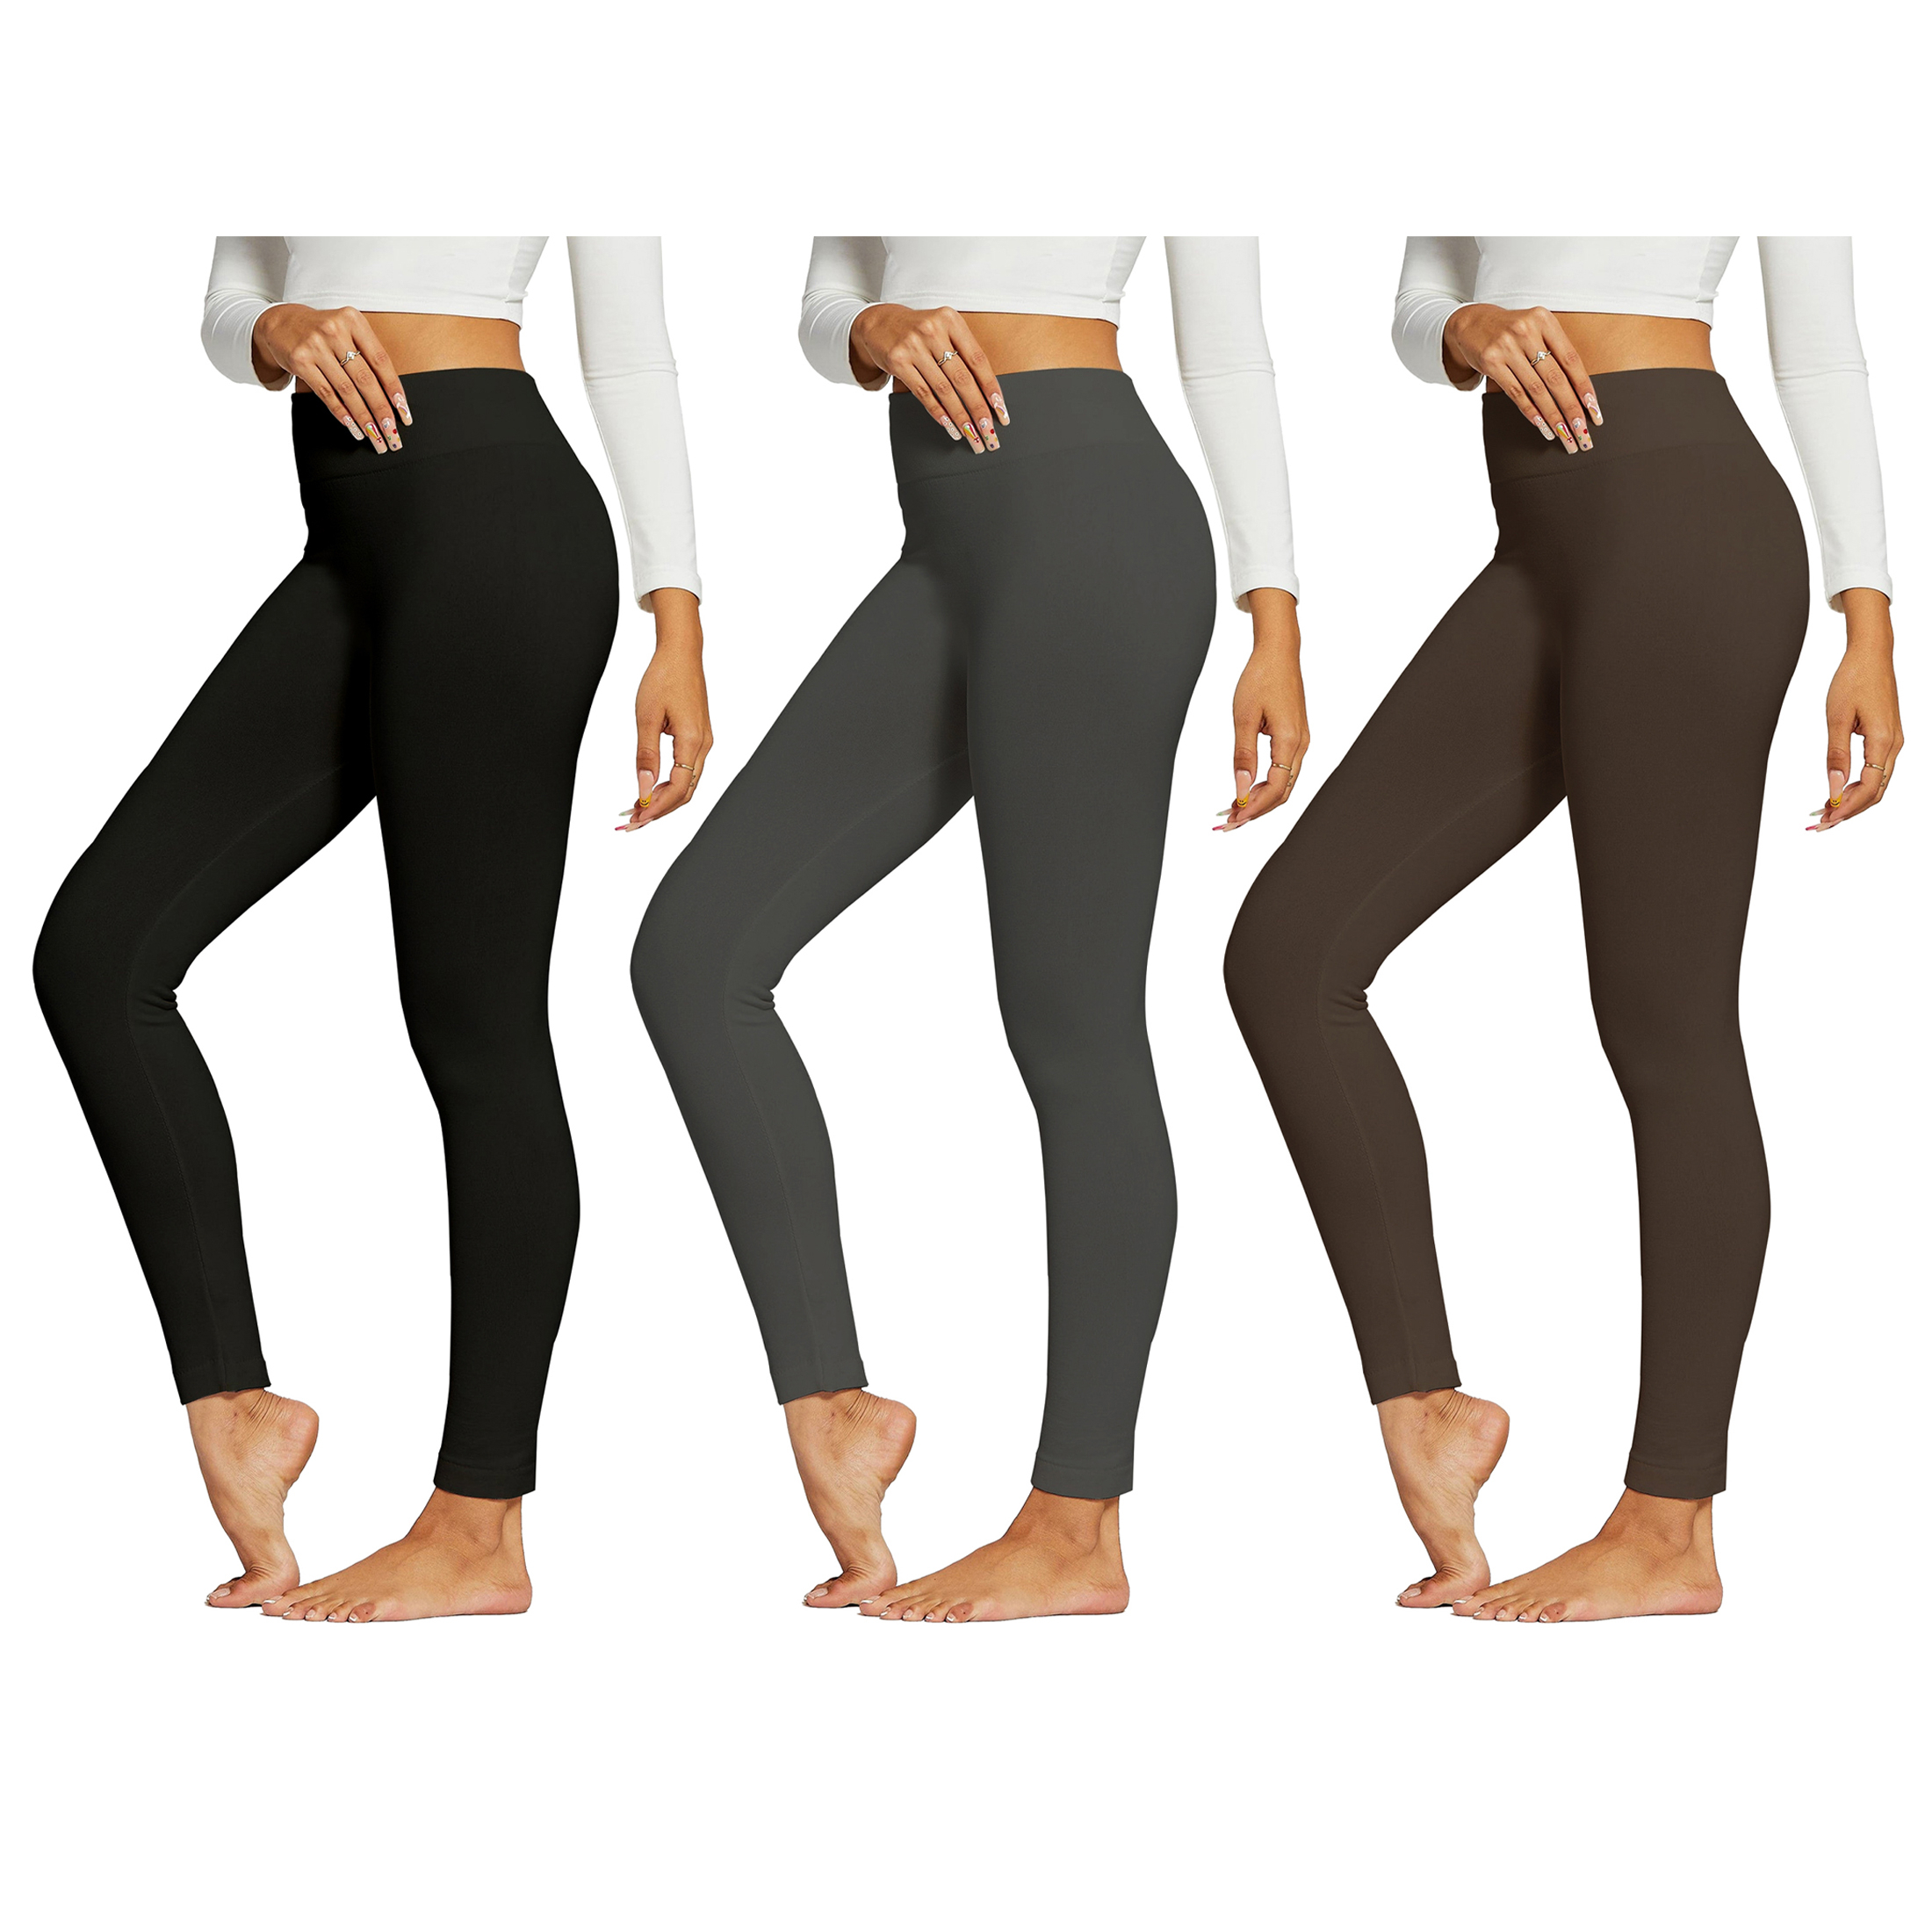 3-Pack:Women's Premium Quality High-Waist Fleece-Lined Leggings (Plus Size Available) - Black, Grey & Brown, Large/X-Large